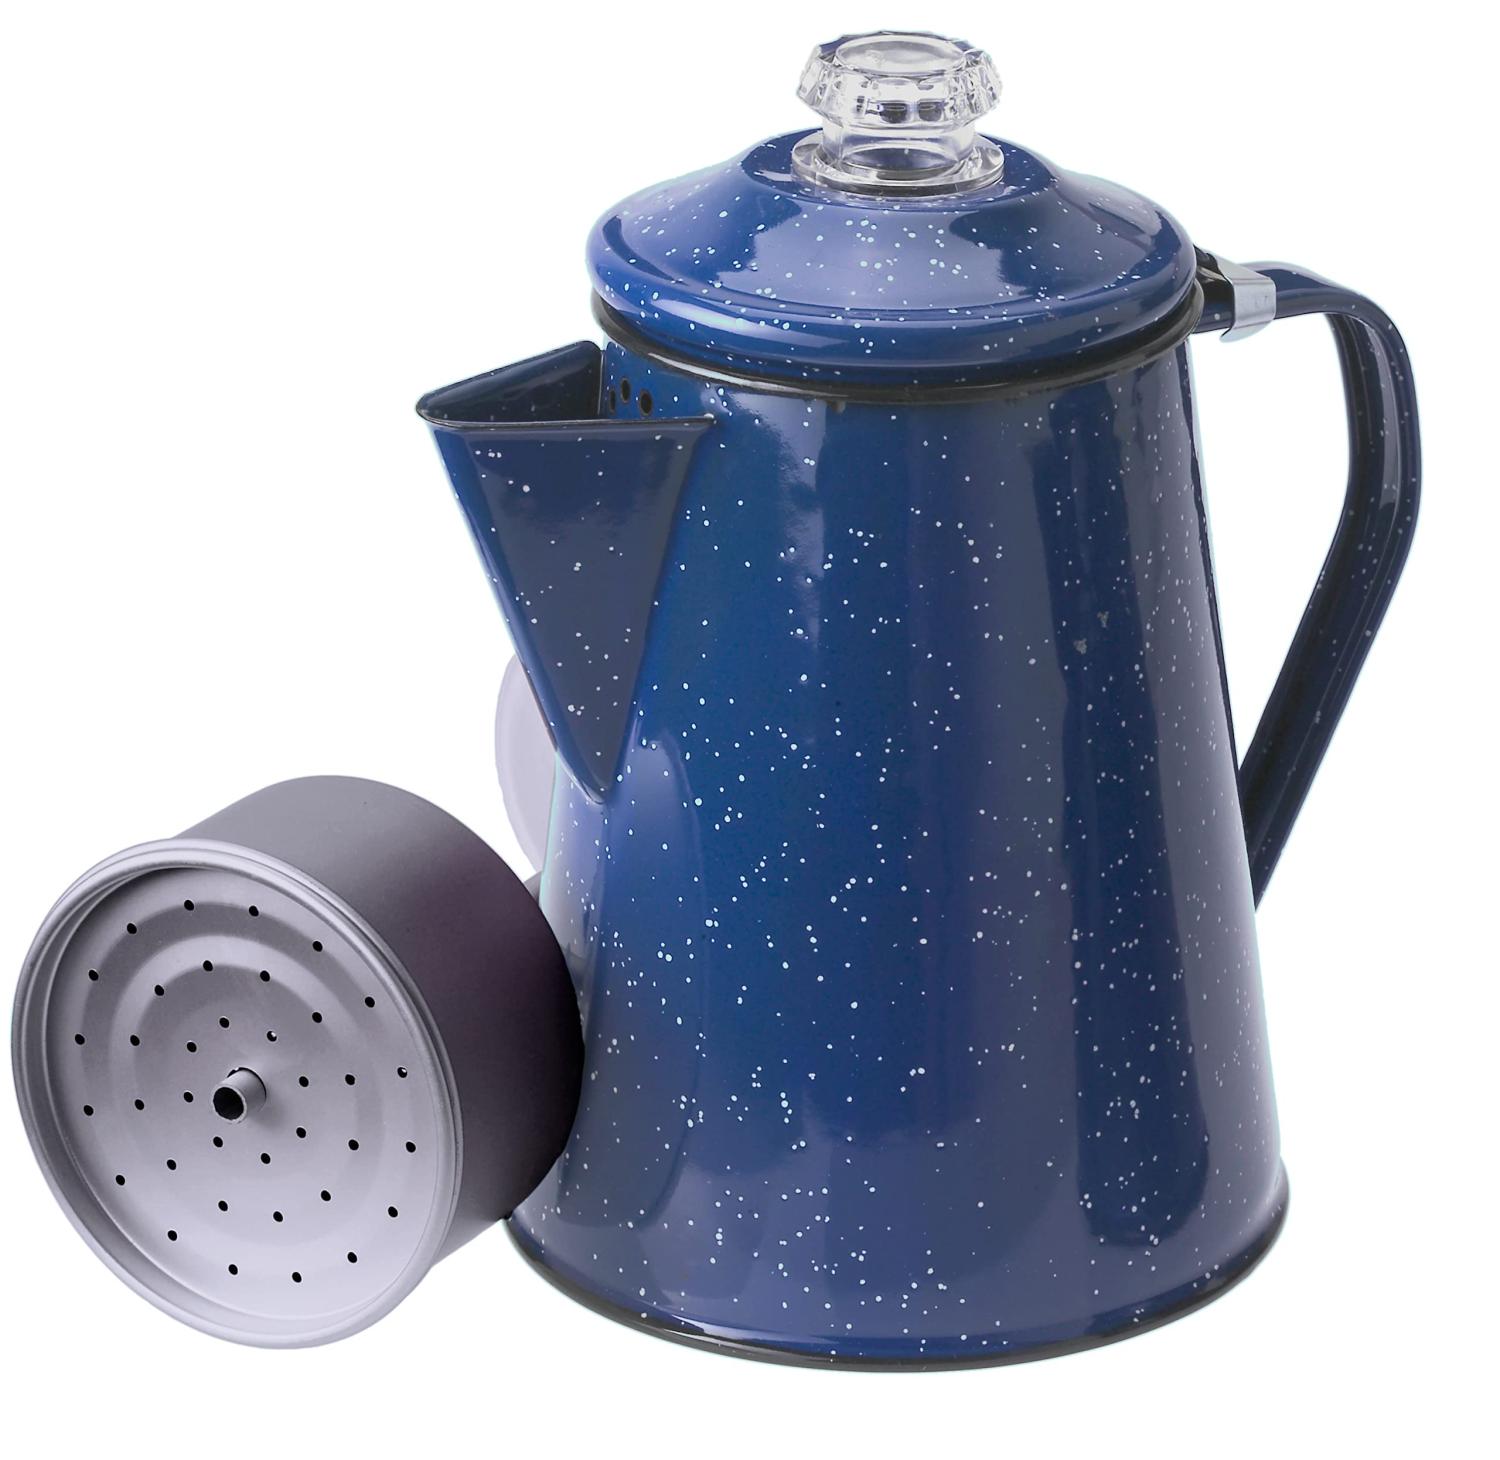 GSI Outdoors Percolator Coffee Pot  Enamelware for Brewing Coffee over  Stove & Fire - Campsite, Cabin, RV, Kitchen, Hunting & Backpacking Blue 8  cup Coffee Pot